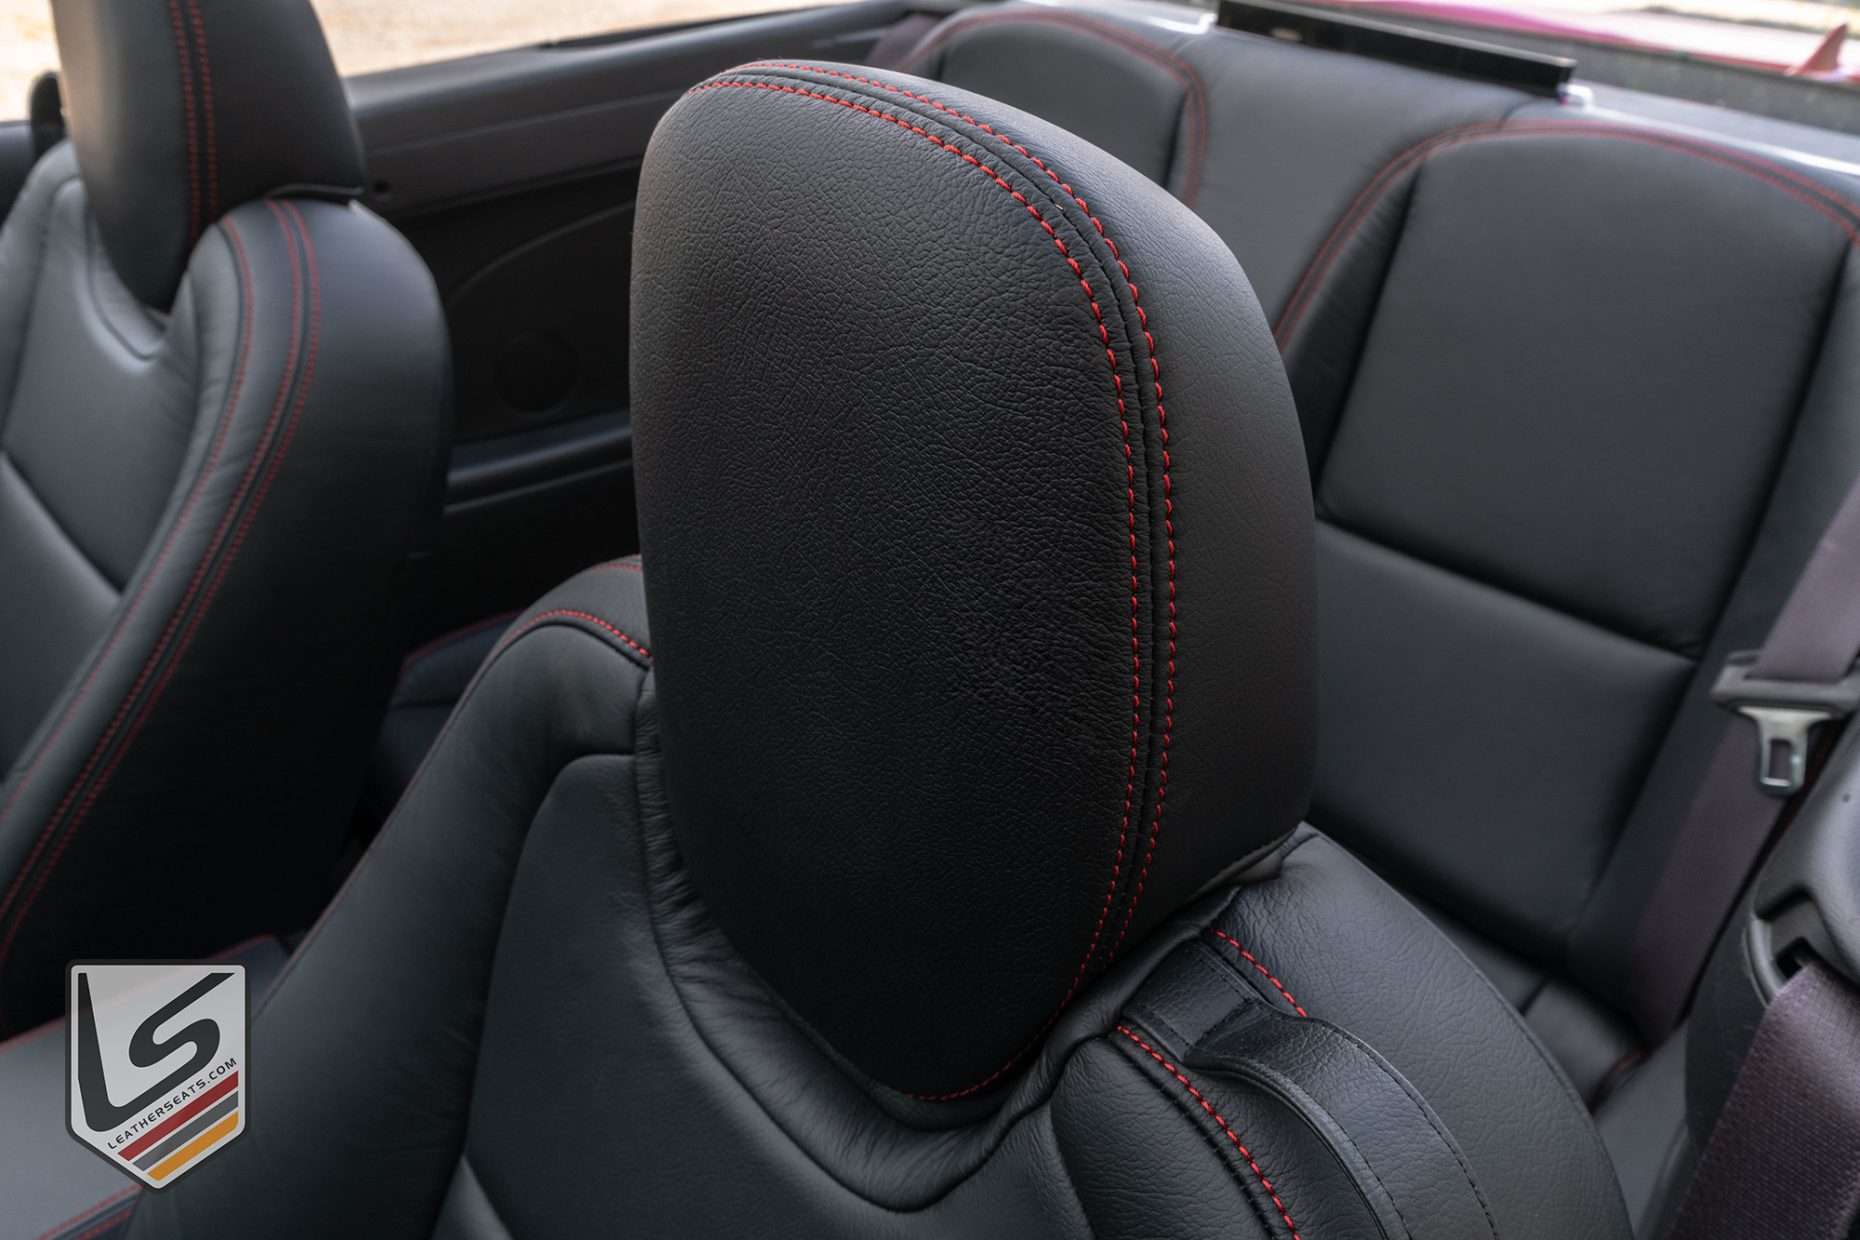 Leather headrest close-up with Cardinal stitching